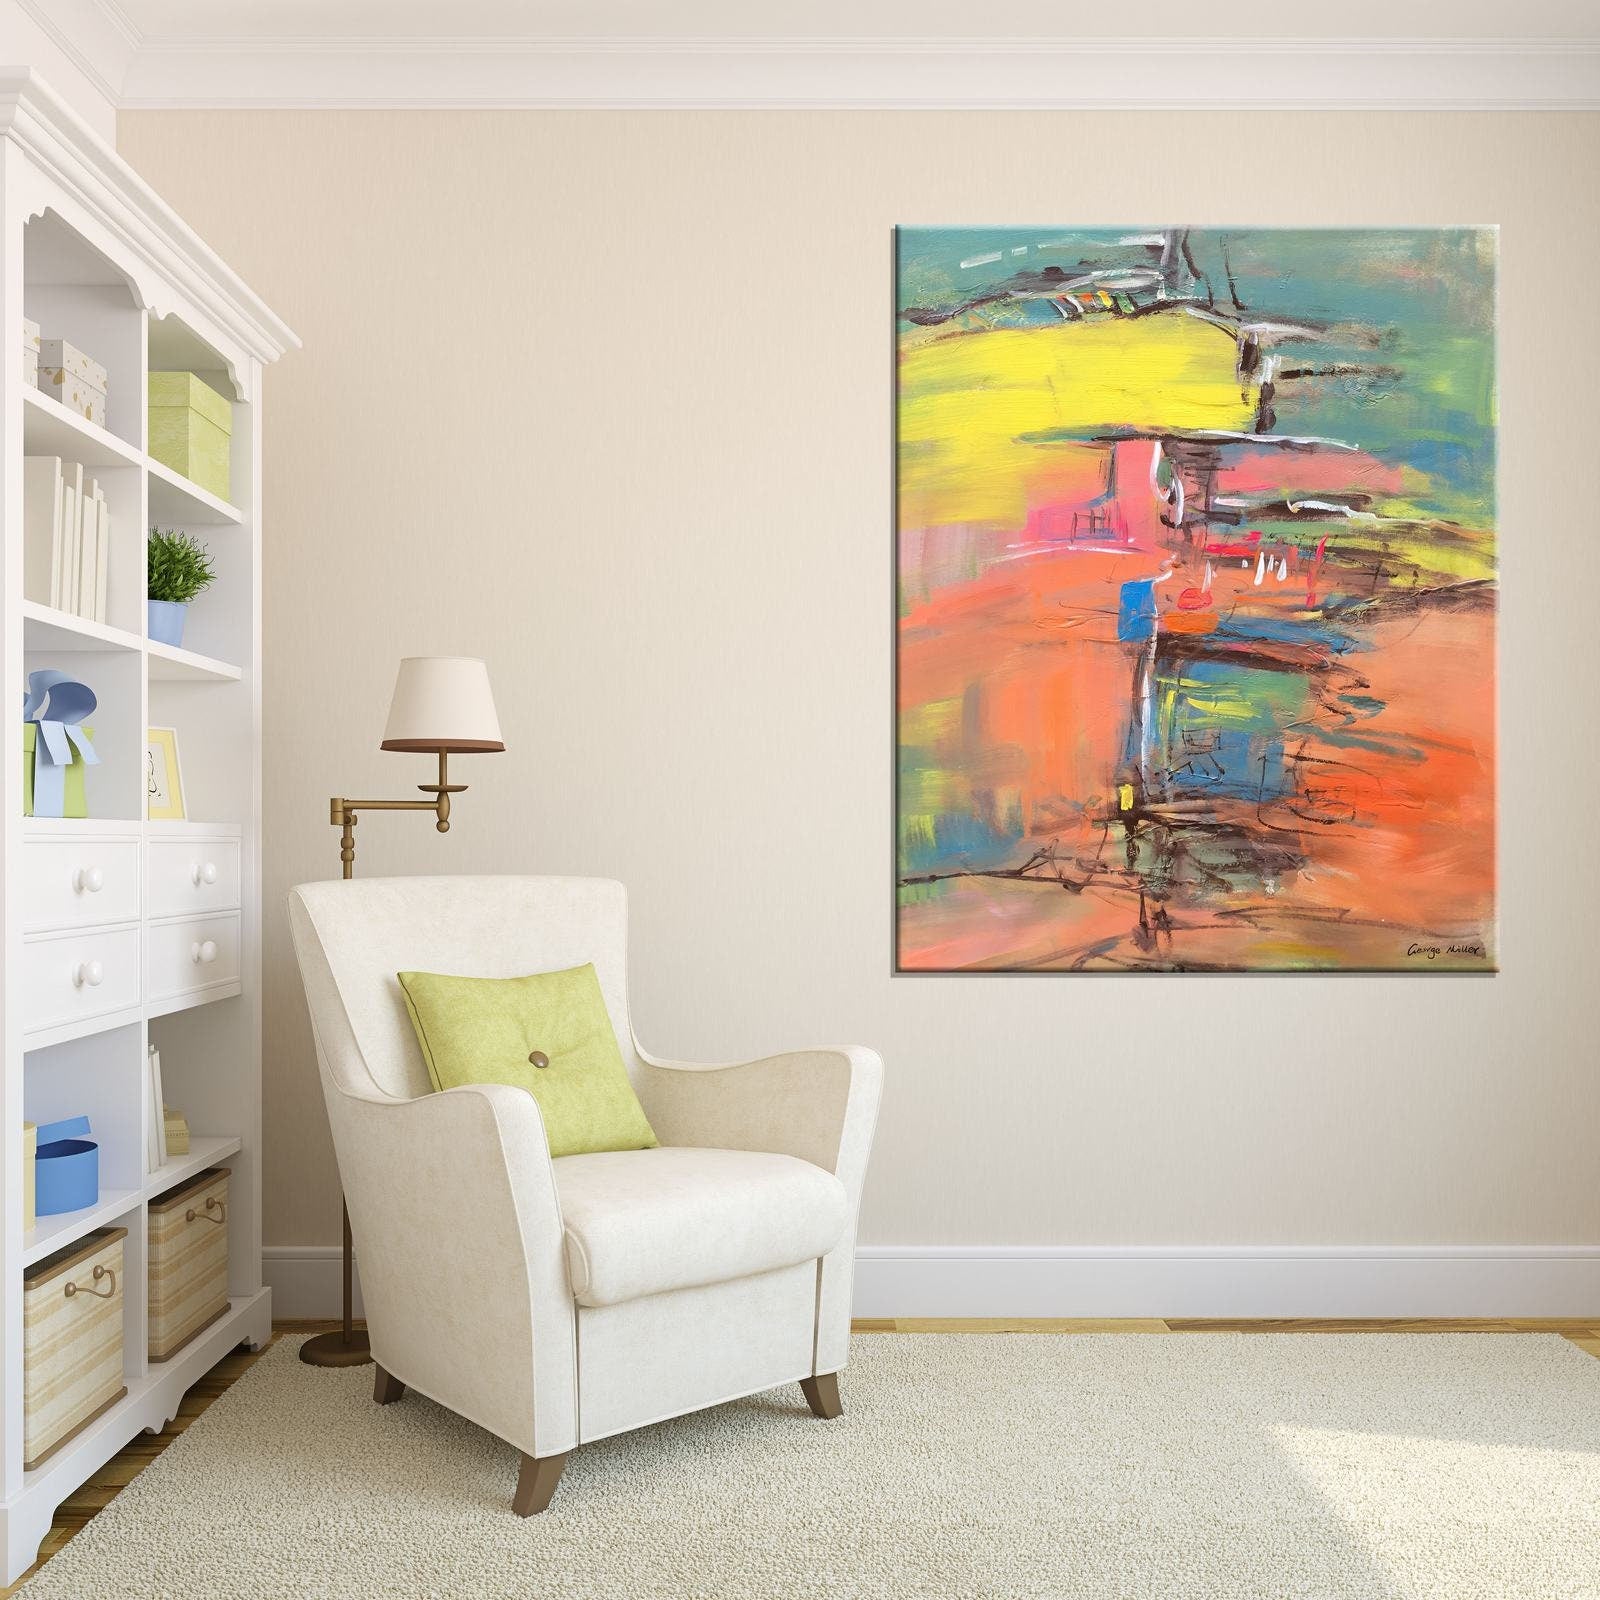 Original Abstract Art, Abstract Oil Painting, Oil Painting Landscape, Wall Decor, Contemporary Art, Large Oil Painting, Abstract Canvas Art